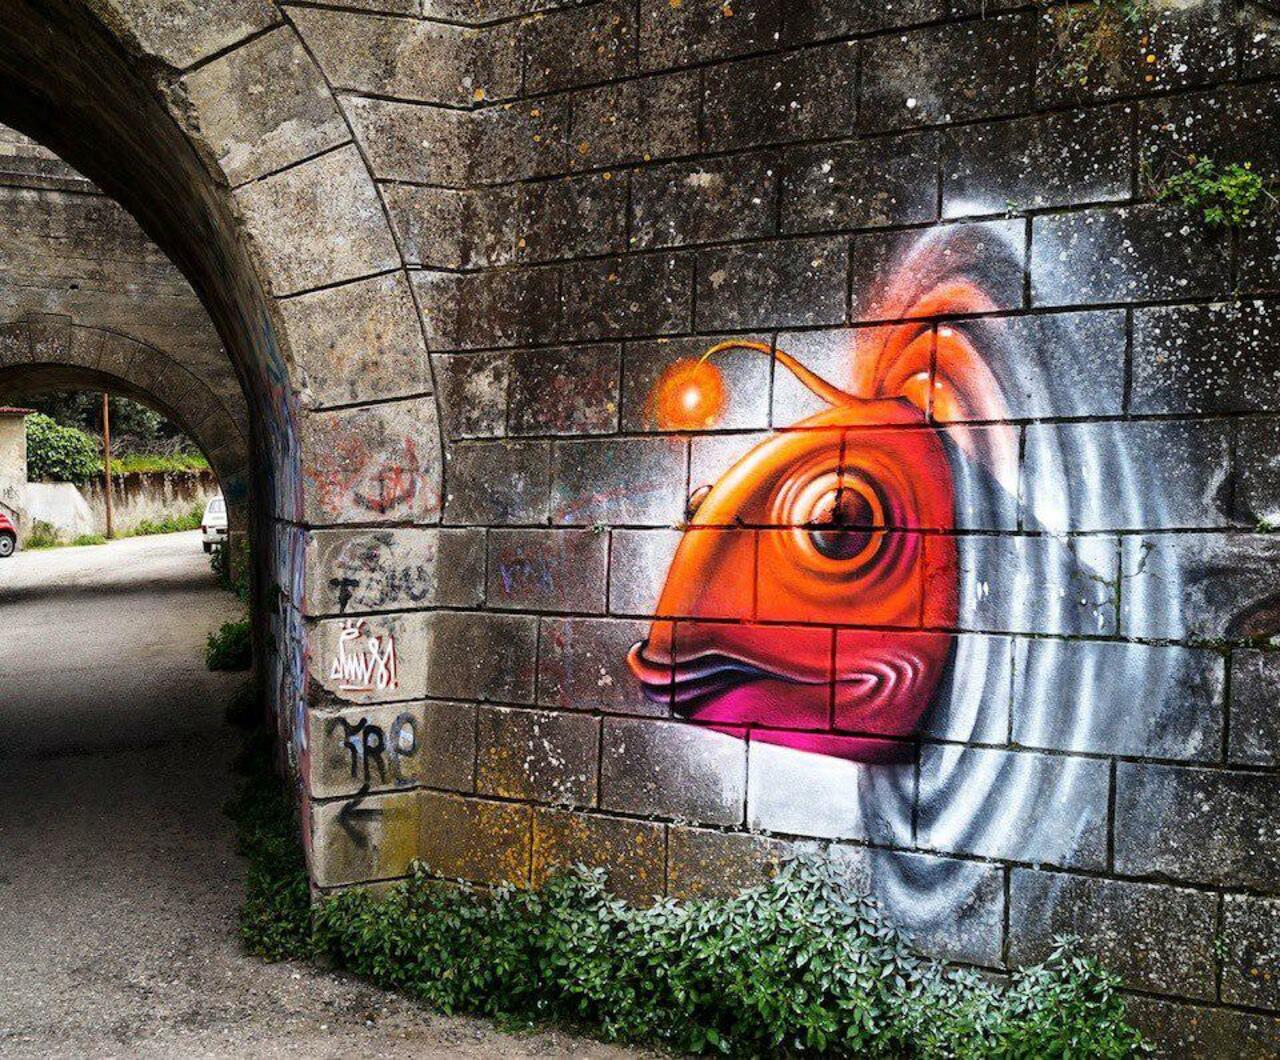 Cosmic fish from outer world. Discover more #streetart pieces: http://bit.ly/CosmicFish #graffiti https://t.co/JaBF8EKnhJ